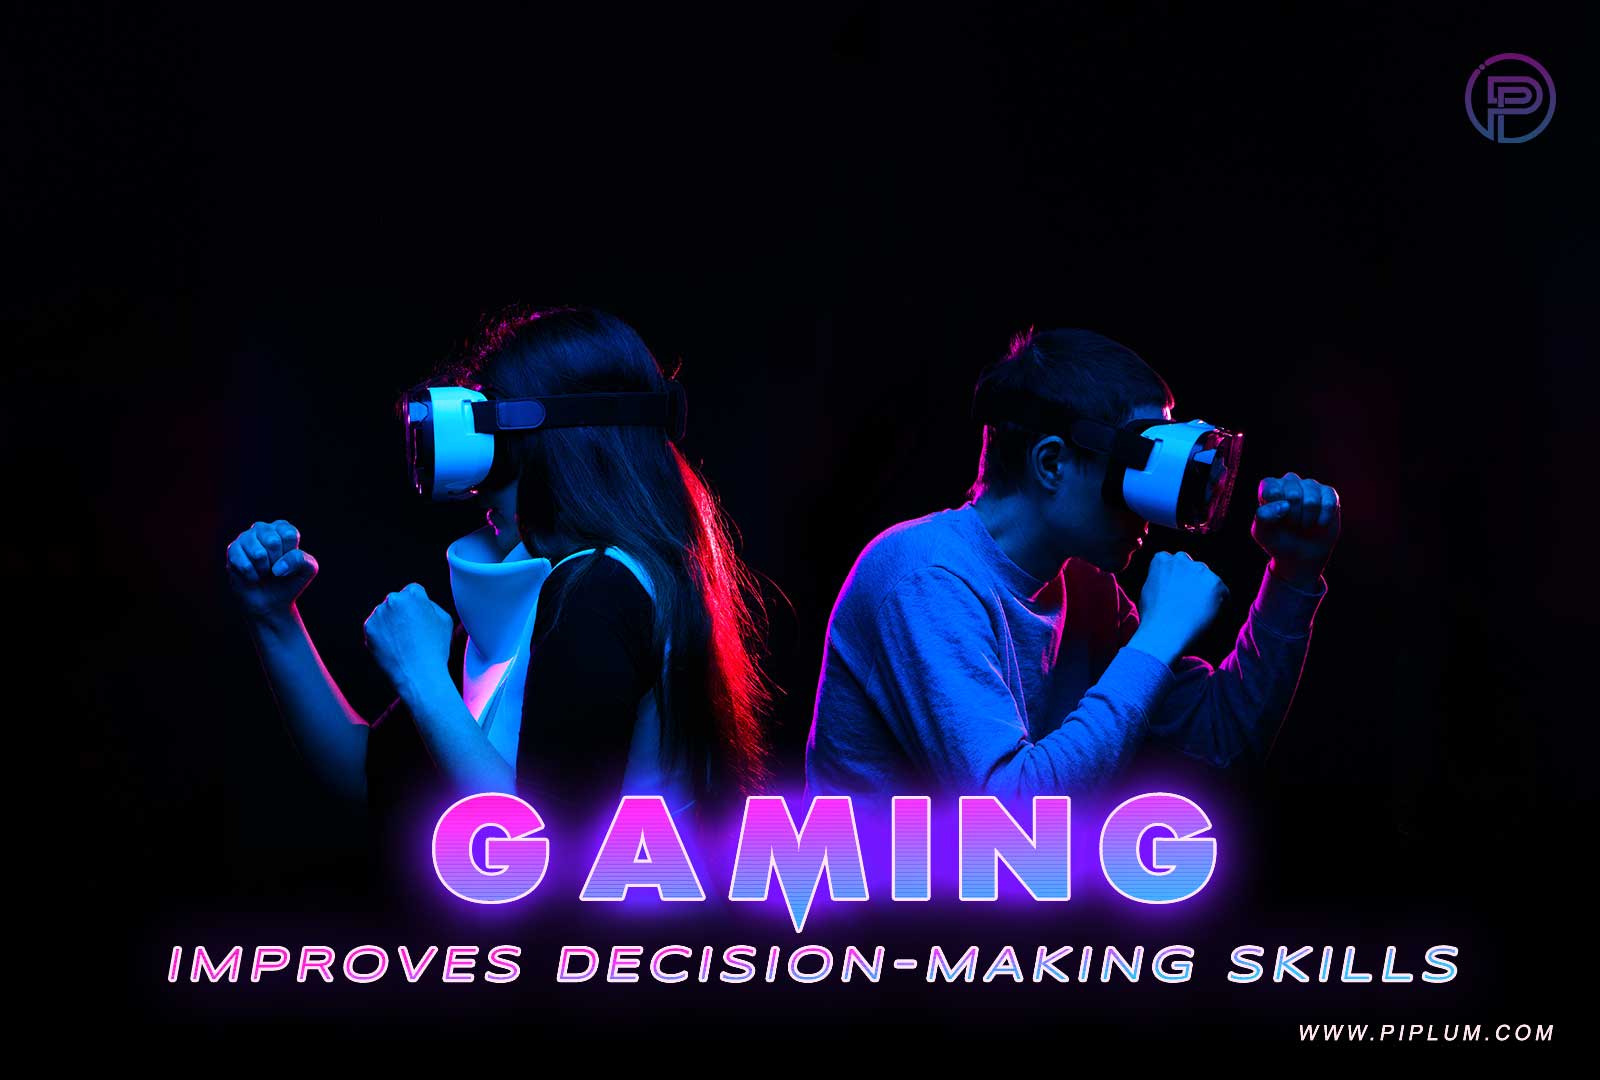 Couple playing virtual reality game. Inspirational quote